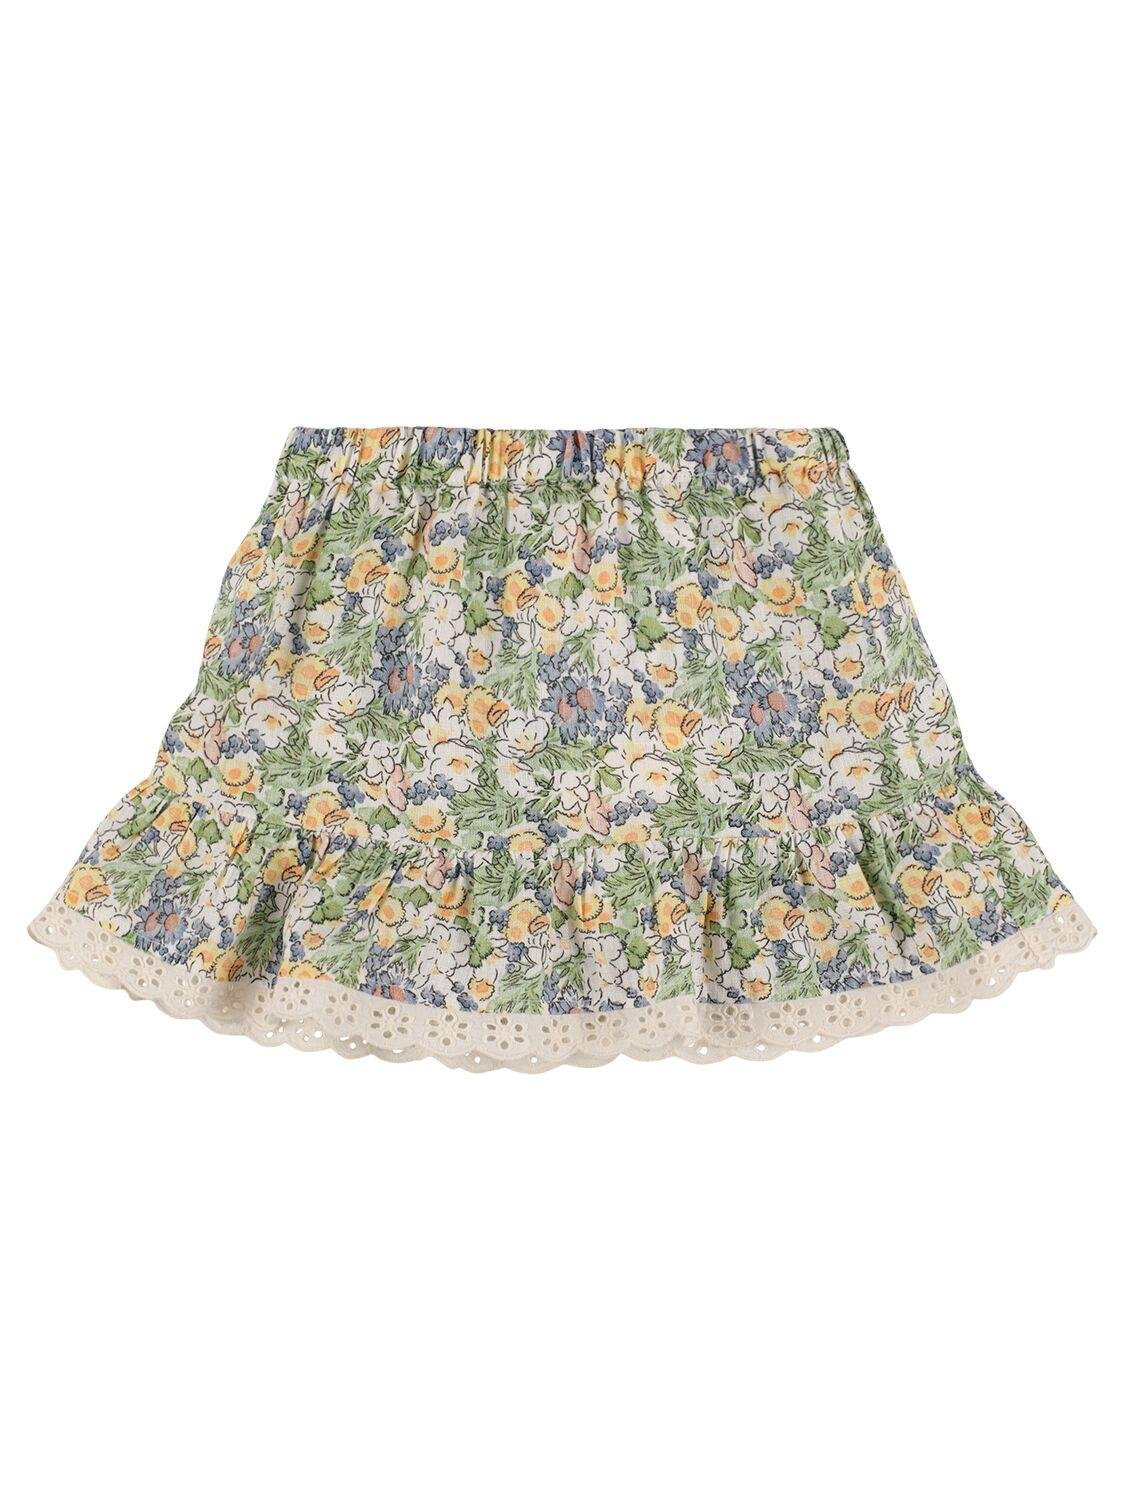 Printed Linen Skirt by THE NEW SOCIETY